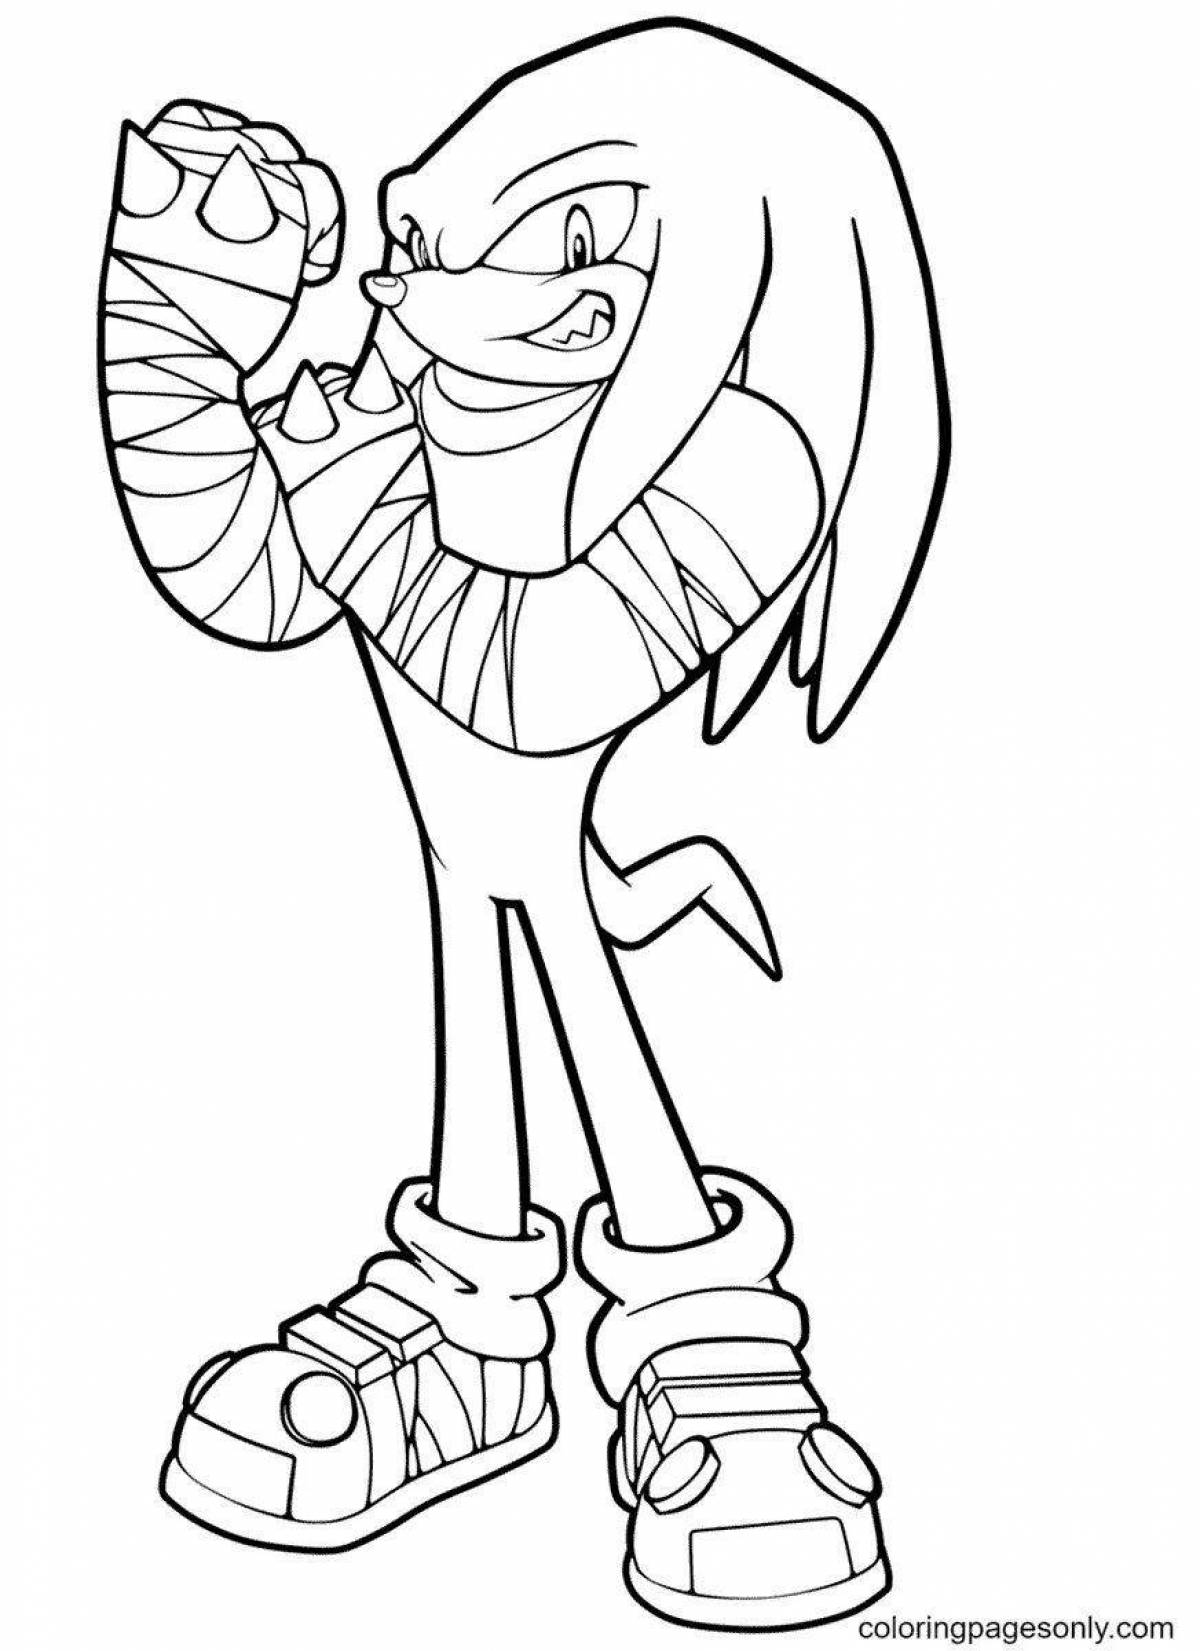 Sonic Knuckles humorous coloring book